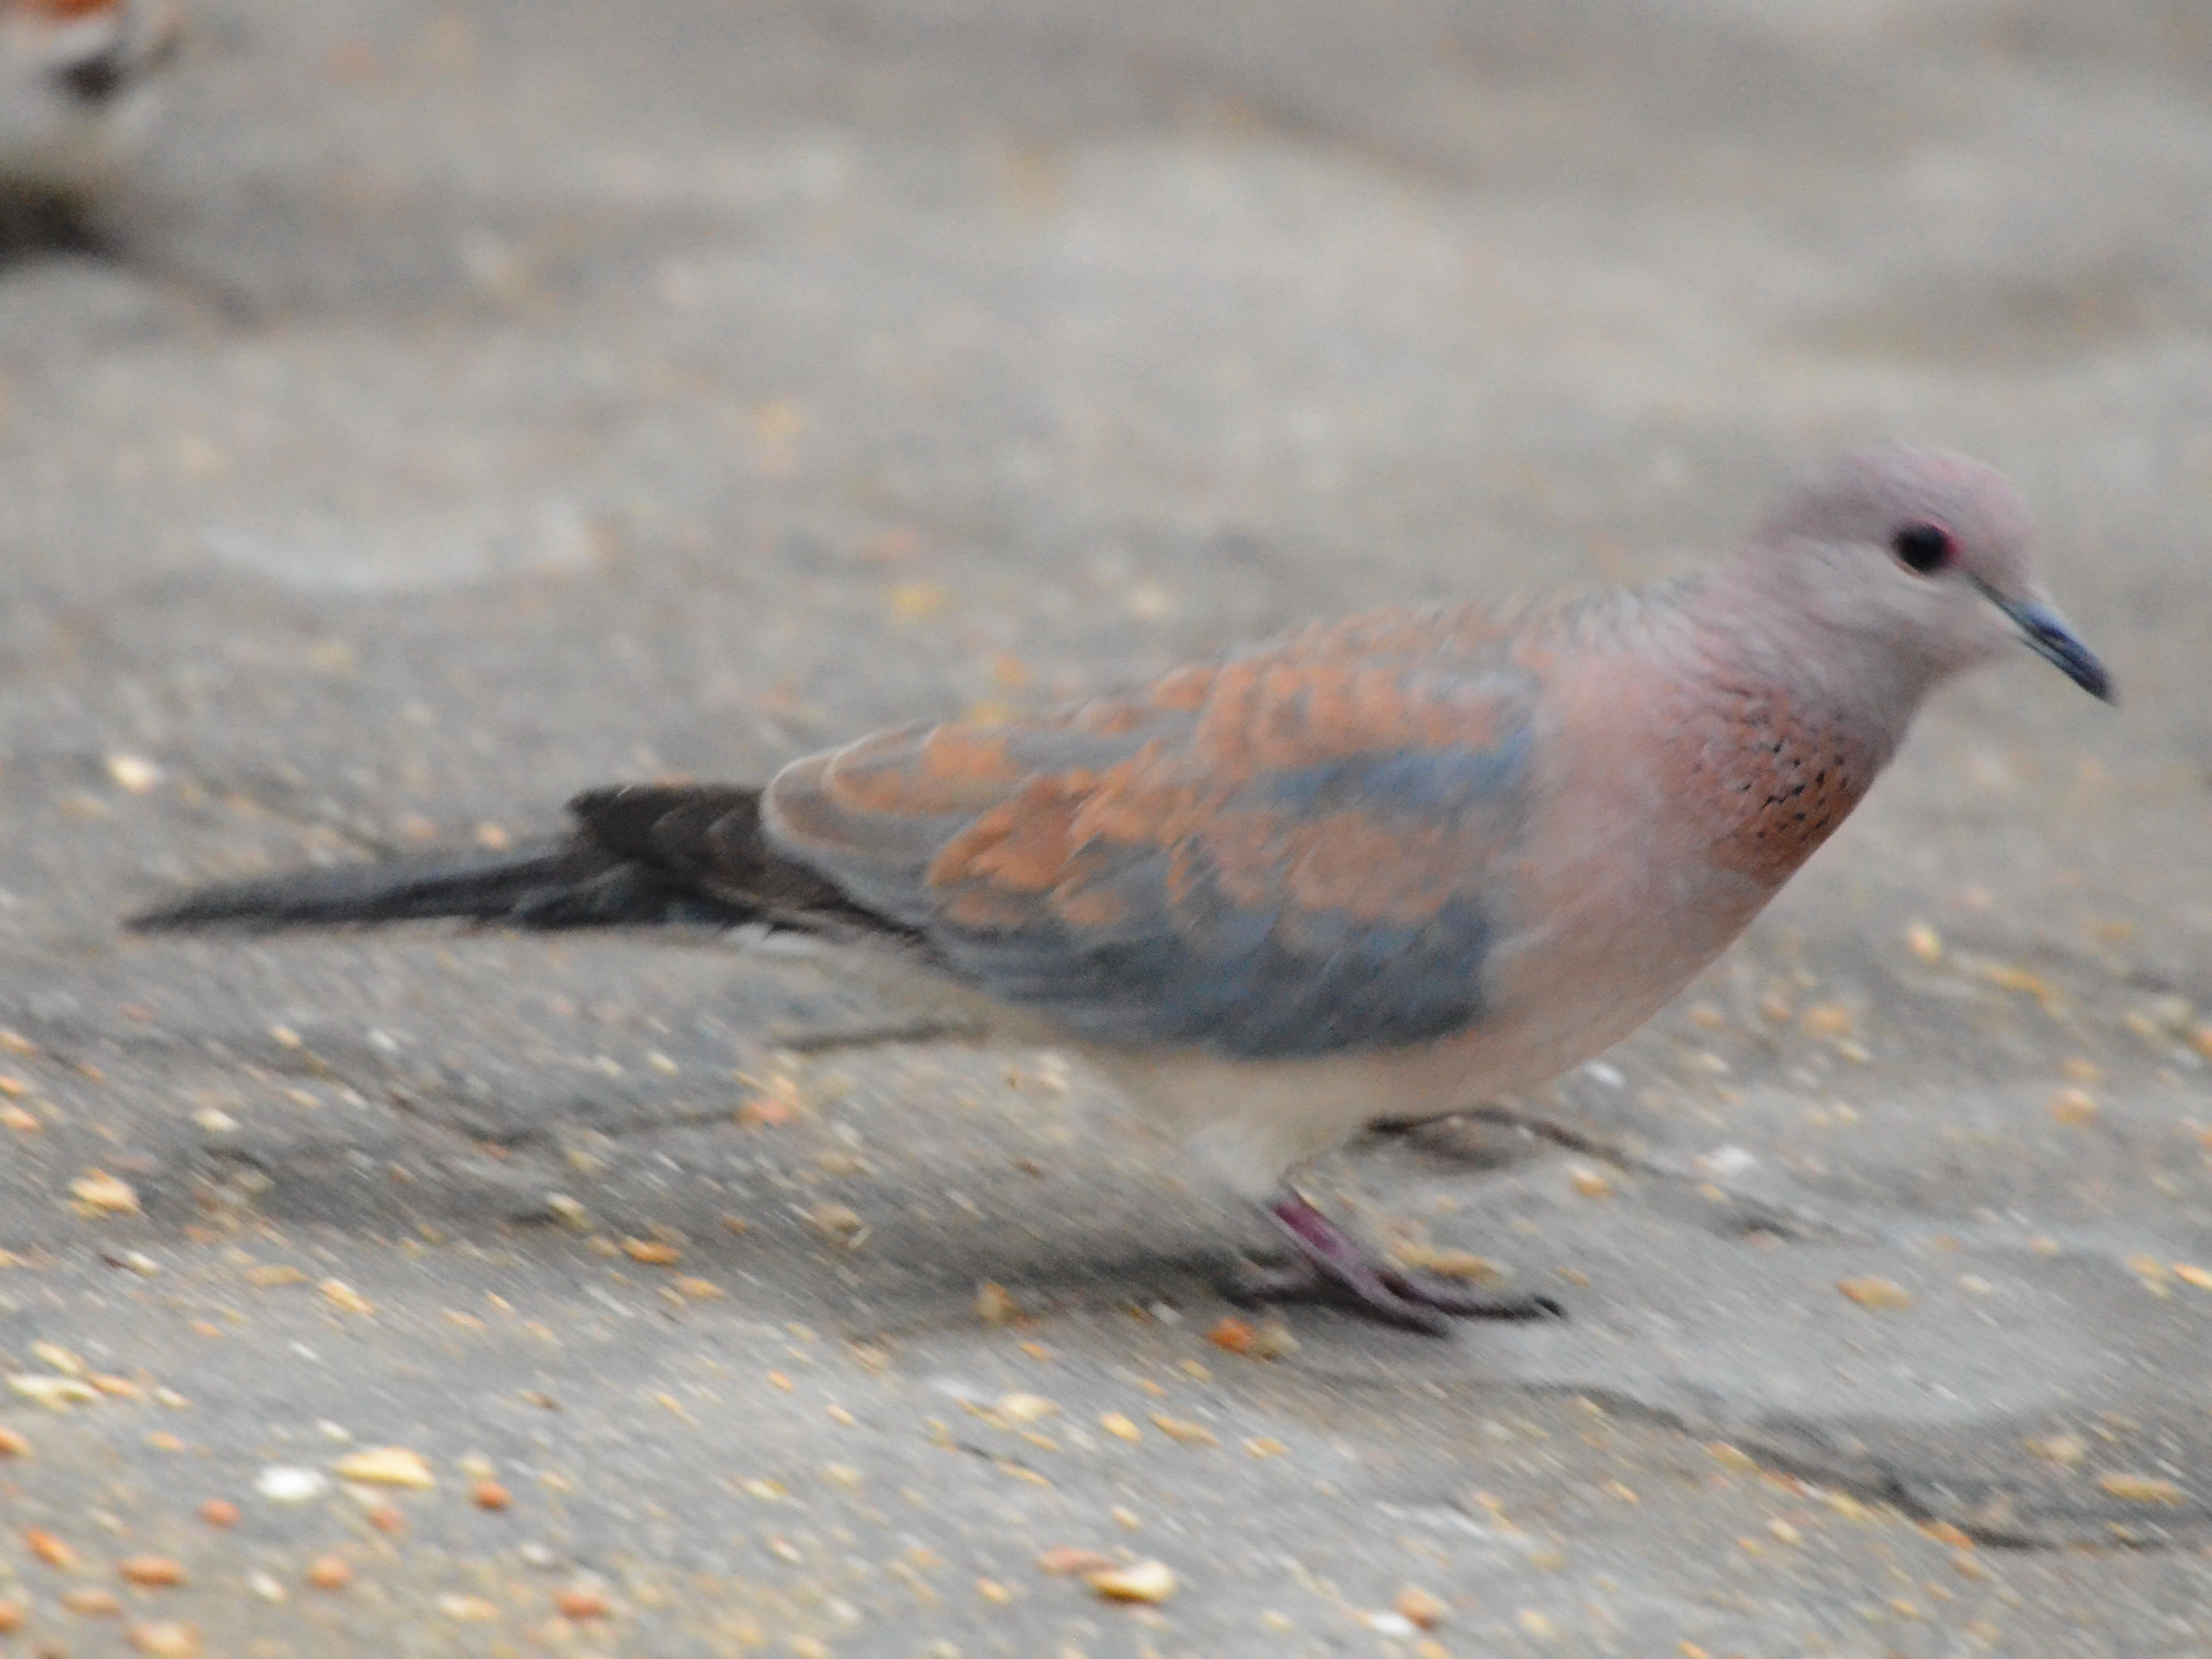 Click picture to see more Laughing Doves.